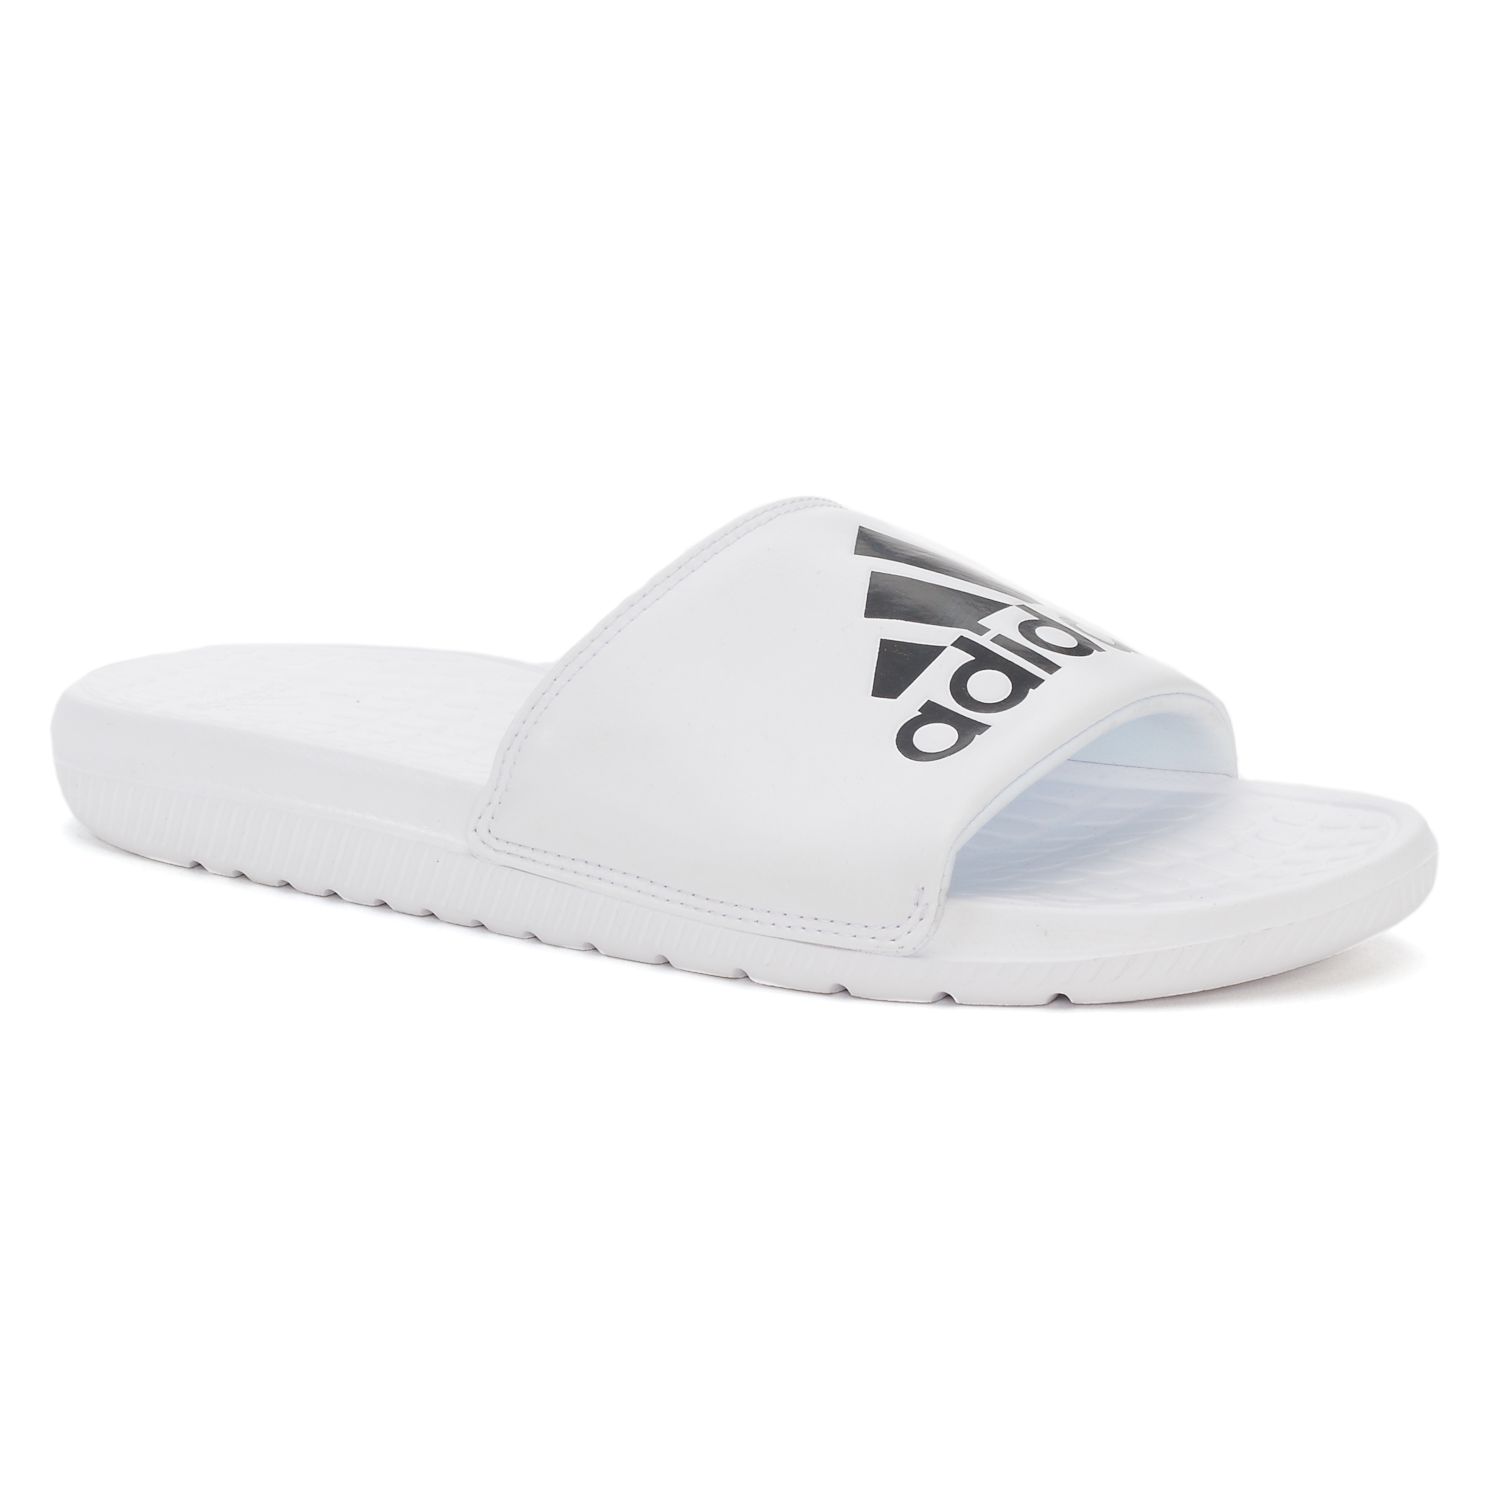 adidas voloomix slides red